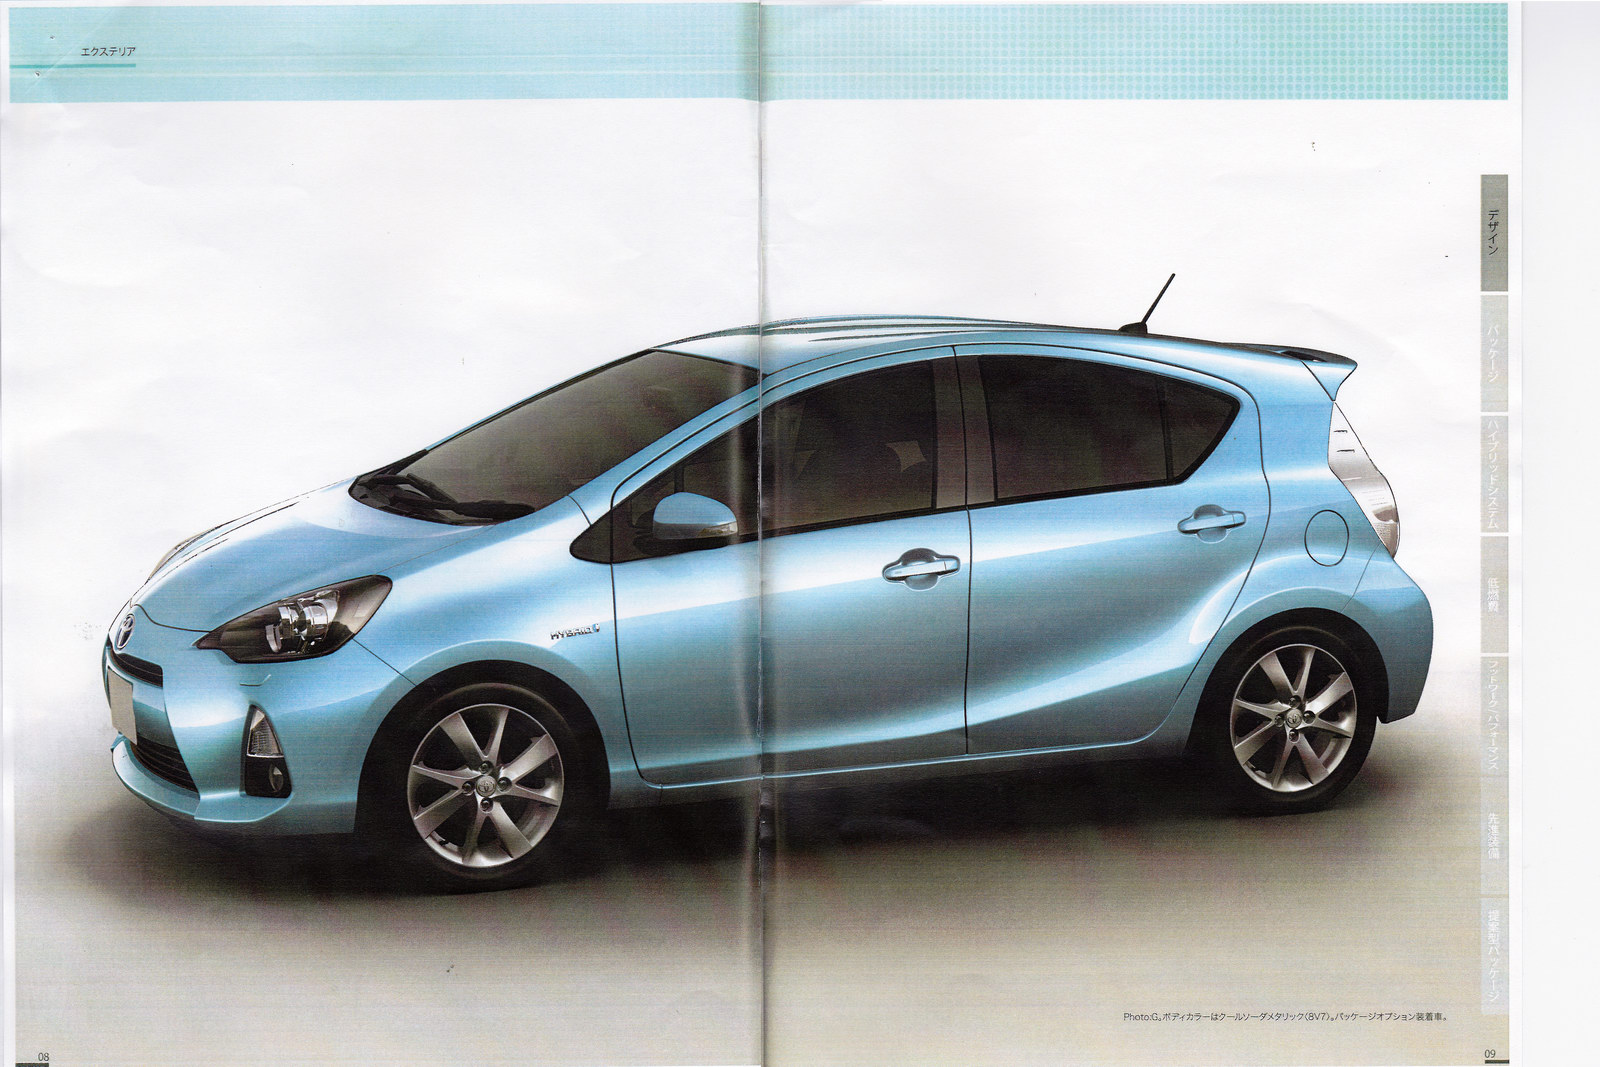 New Toyota Prius C: Leaked Brochure Reveals Standalone Small